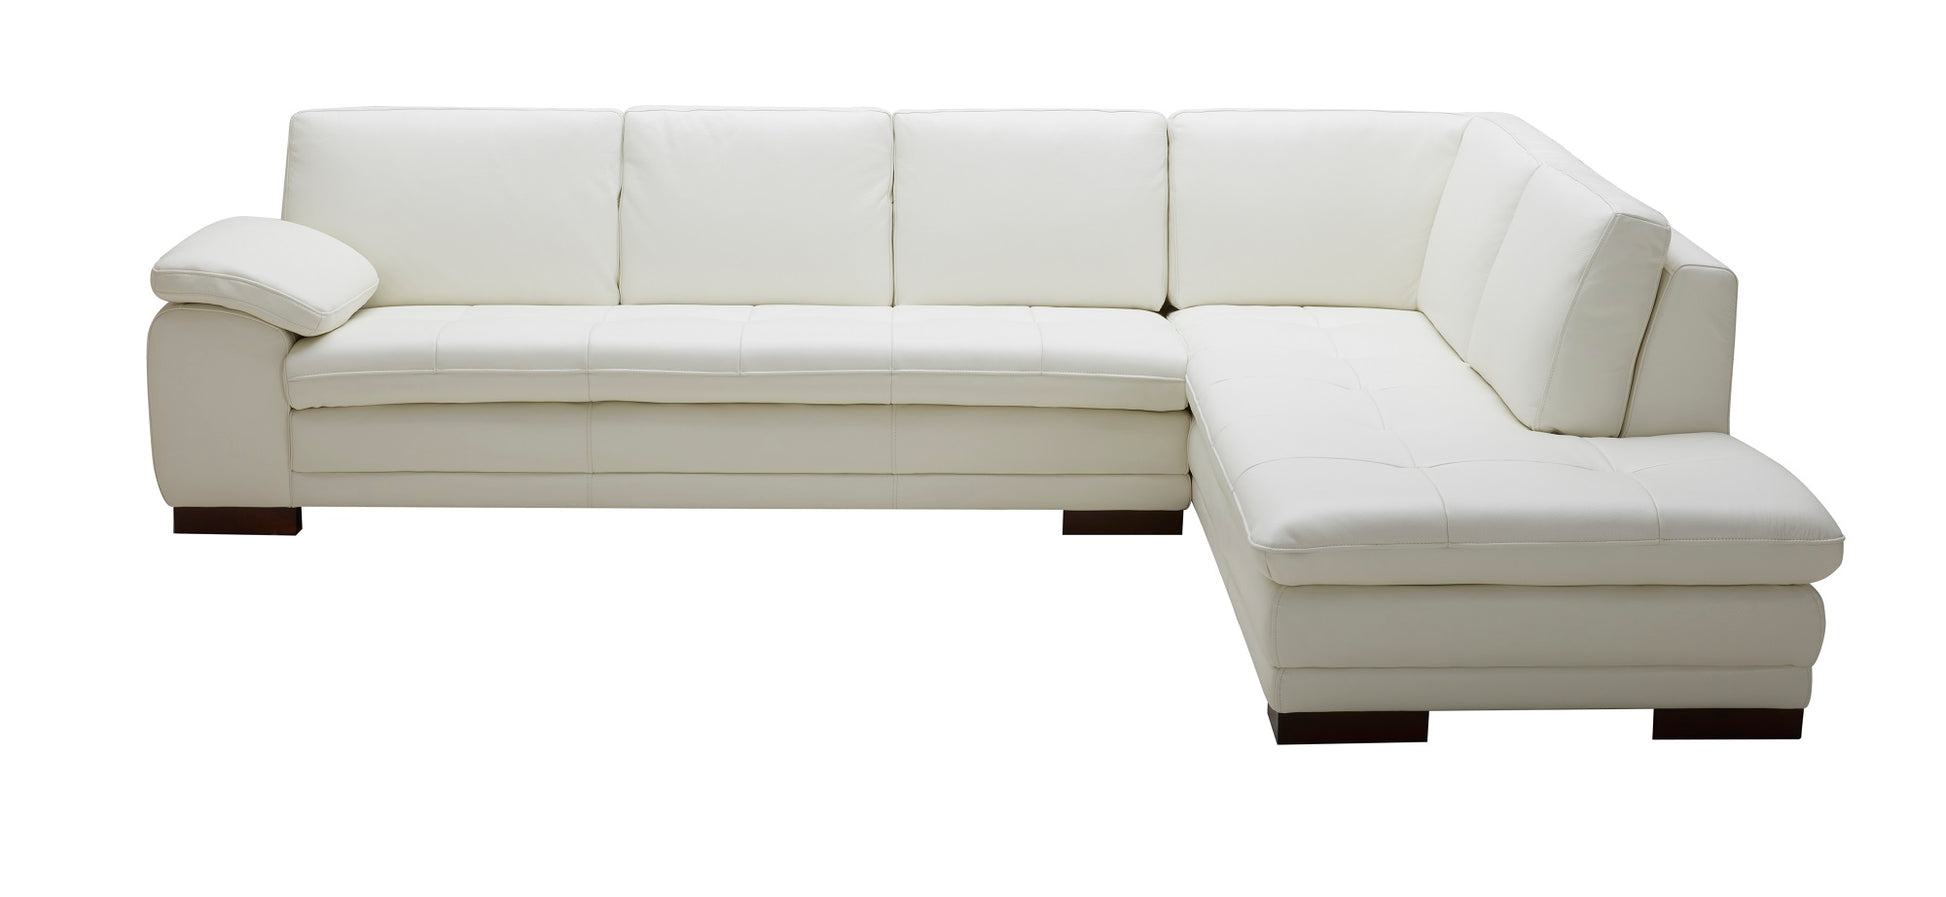 625 Italian Leather Sectional Sofa White RHF by JM